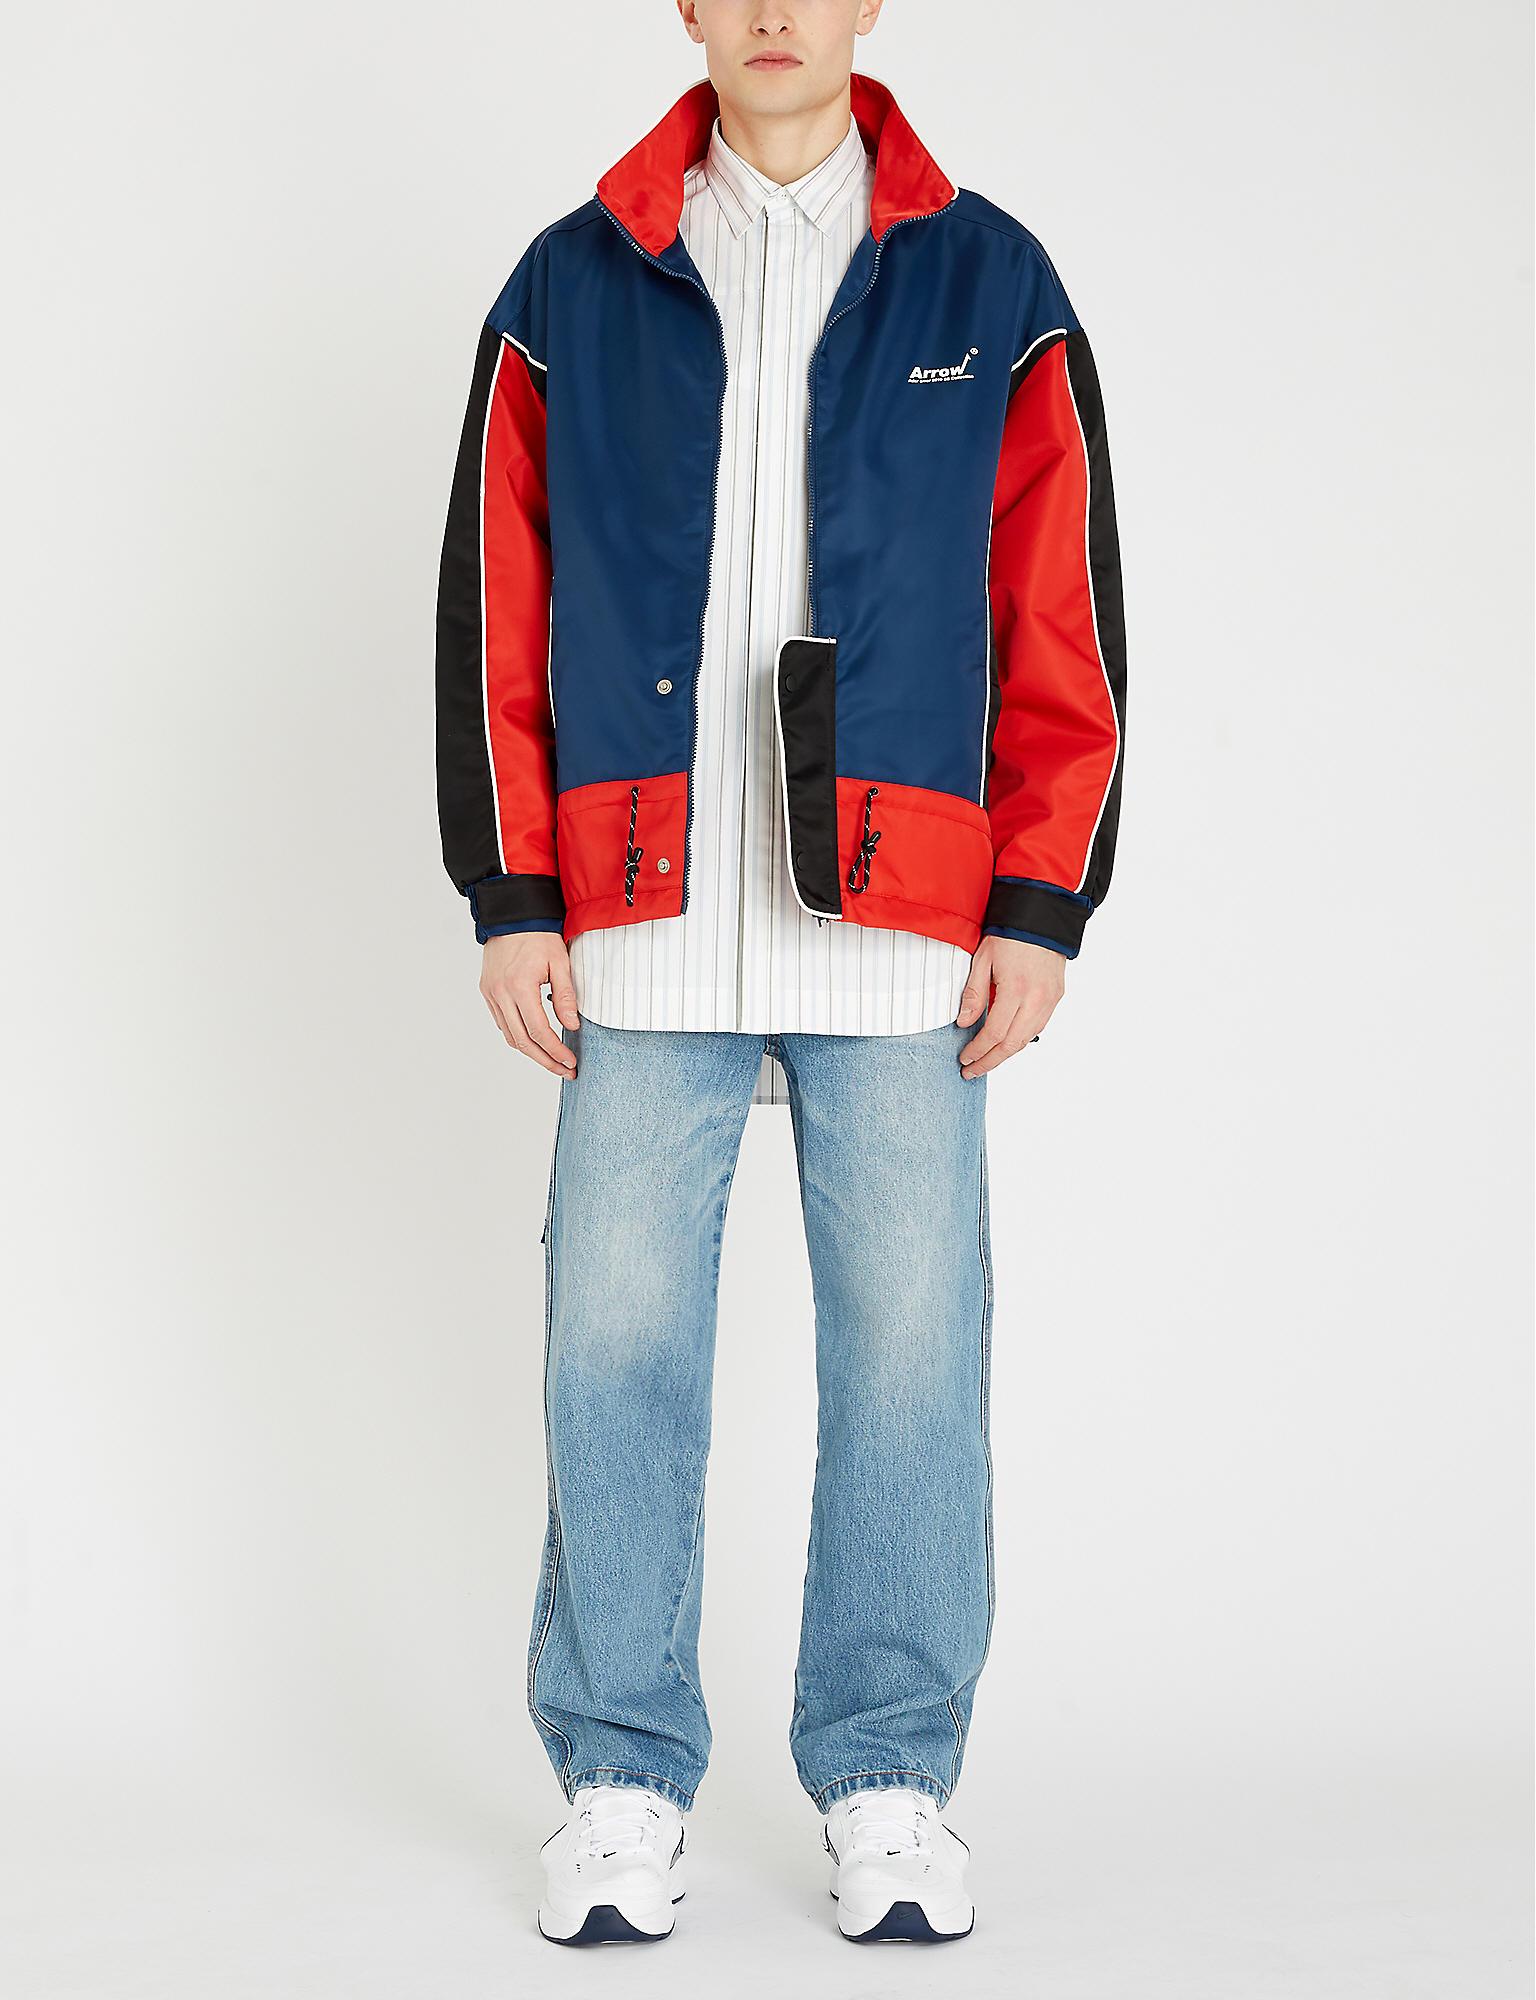 ADER error Colour-blocked Shell Jacket in Red for Men - Lyst